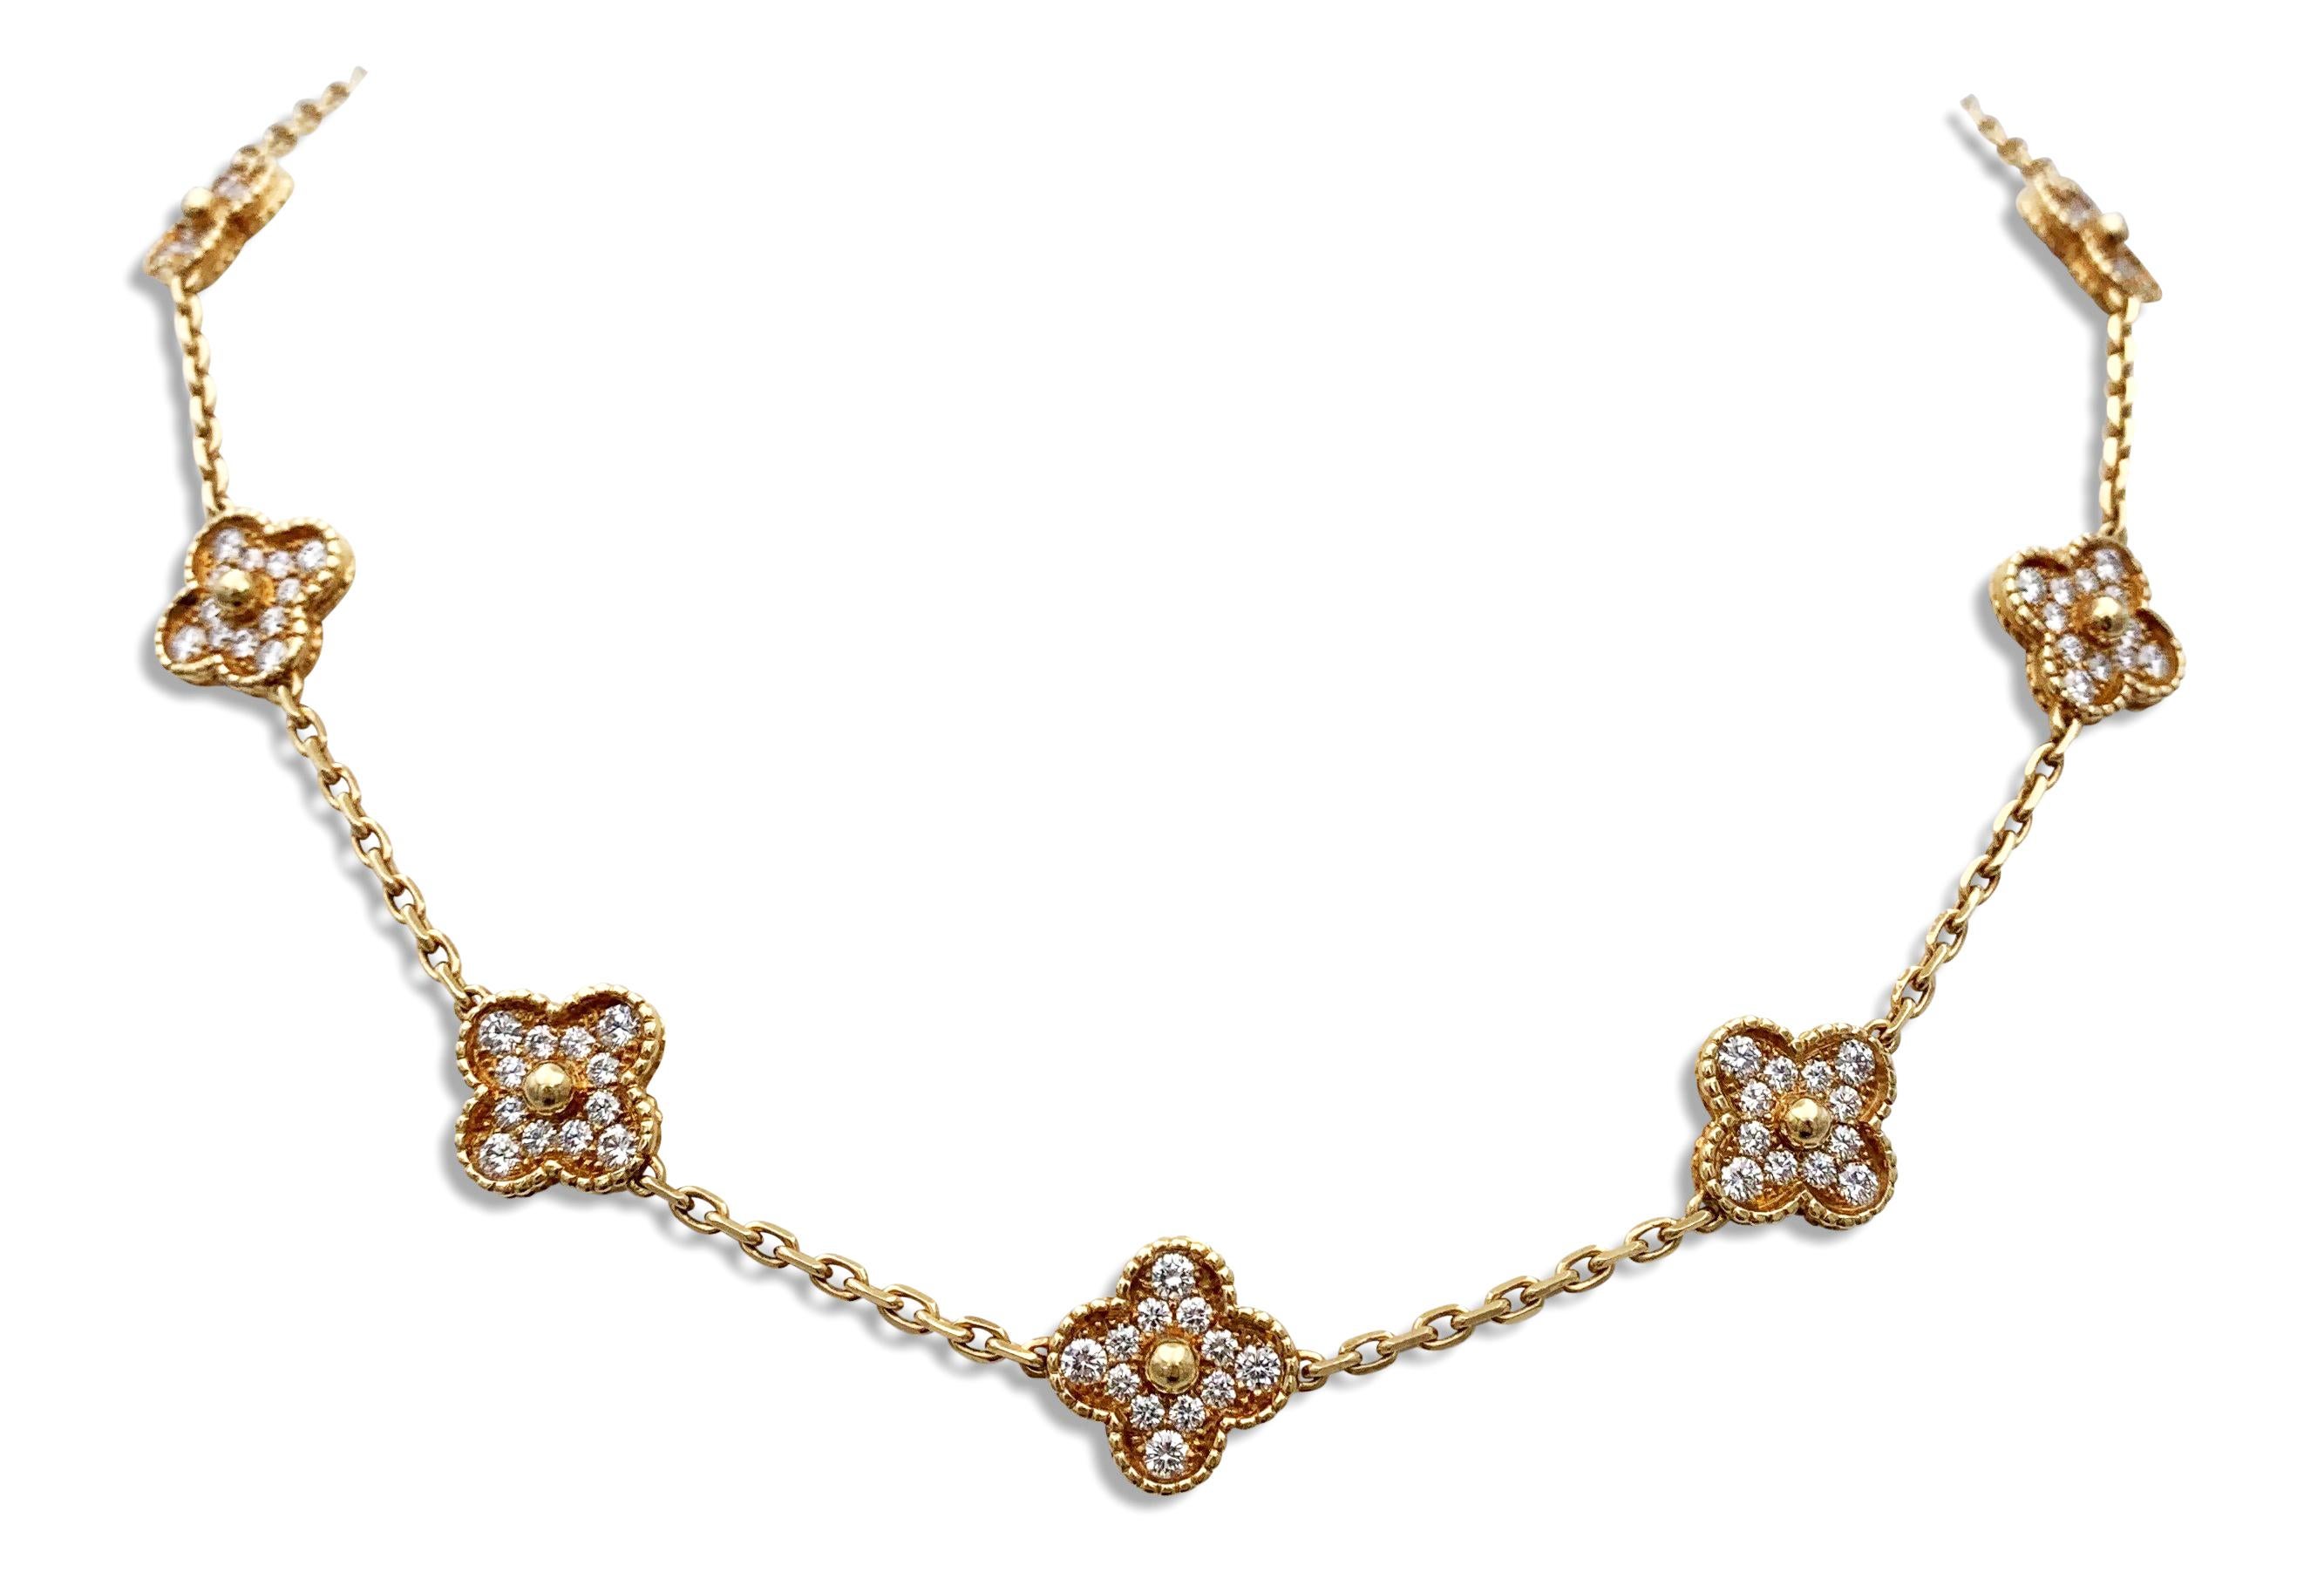 Authentic Van Cleef & Arpels 'Vintage Alhambra' necklace crafted in 18 karat yellow gold featuring 10 cloverleaf inspired motifs set with high-quality round brilliant cut diamonds, weighing an estimated 5.60 cttw.  The necklace measures 17 1/2